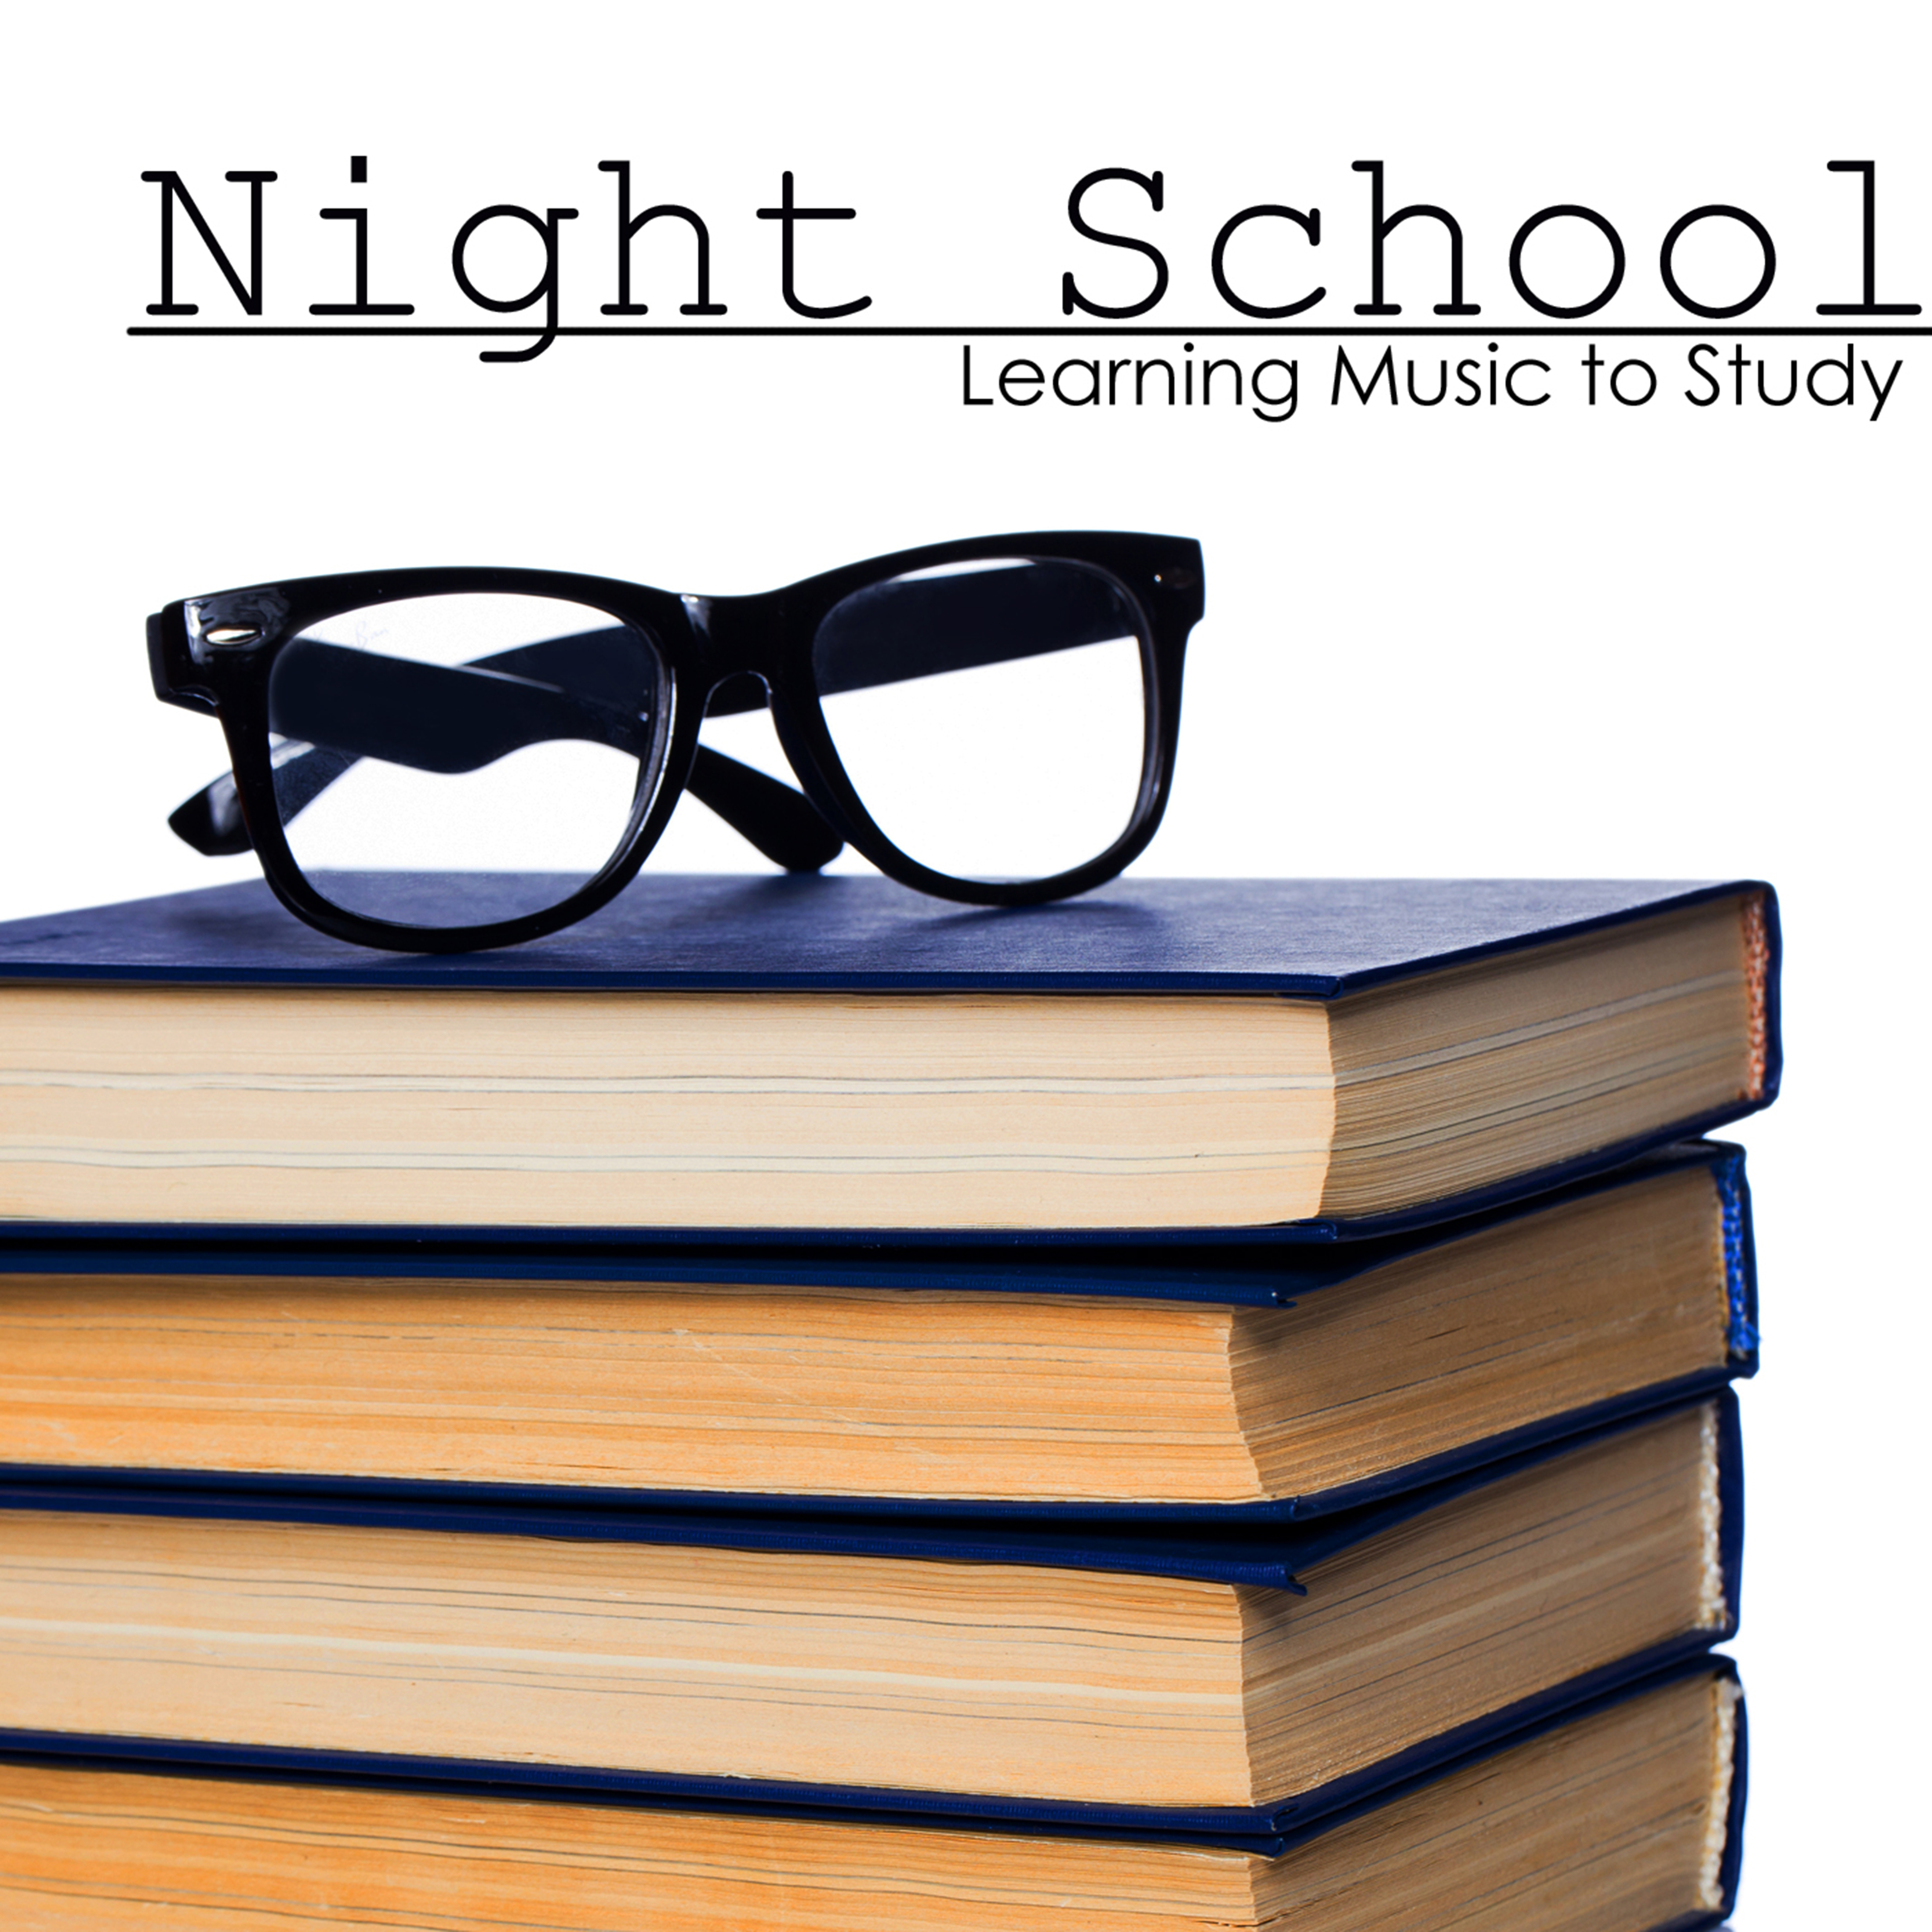 Night School - Learning Music to Study, Improve Focus With Concentration Music to Read